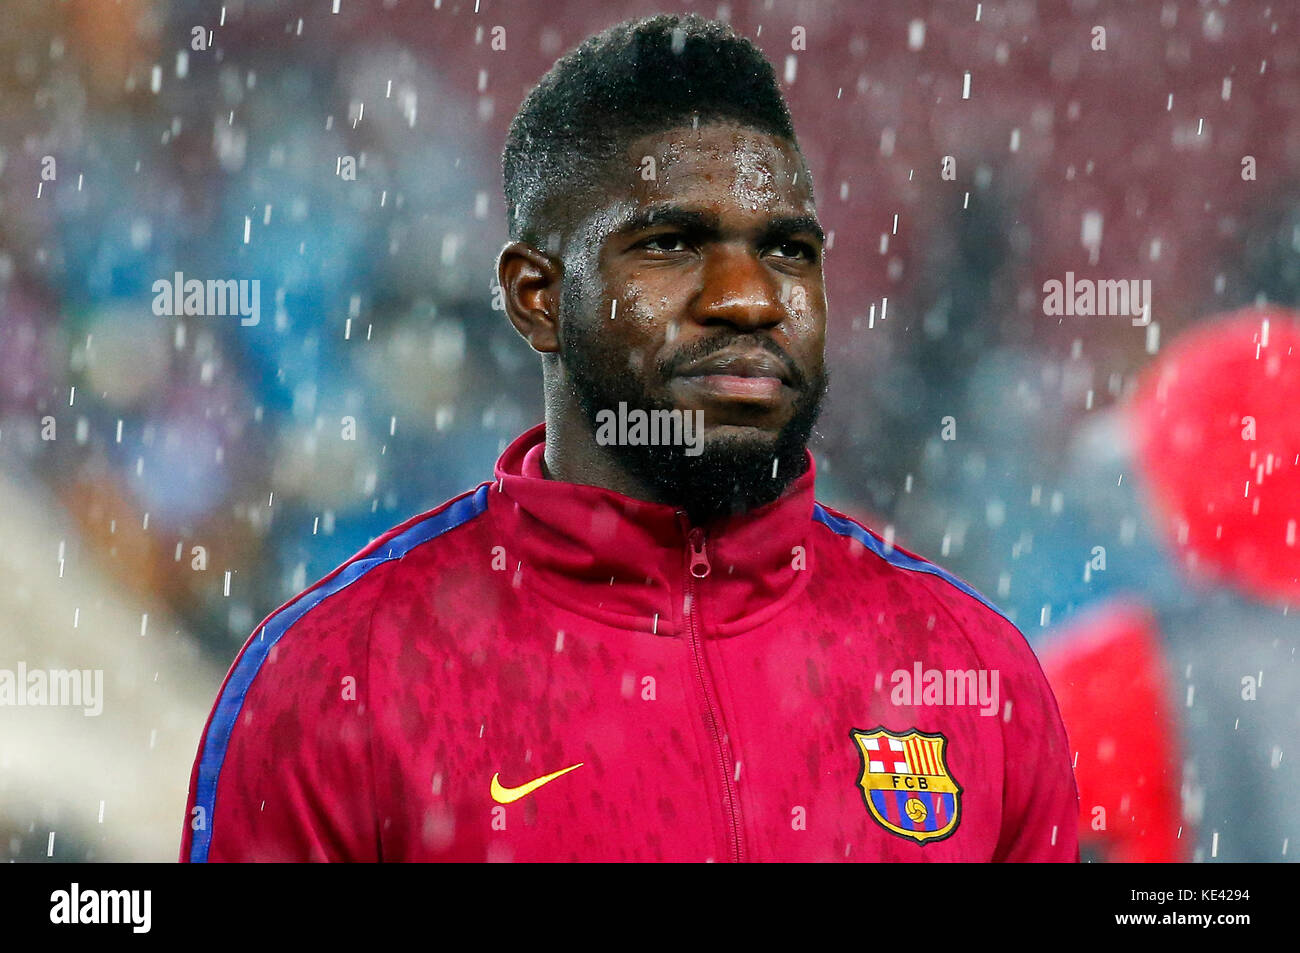 Barcelona, Spain. 18th Oct, 2017. Samuel Umtiti during the match between FC Barcelona v Olympiakos, corresponding to the Champions League, on october 18, 2017. Credit: Gtres Información más Comuniación on line, S.L./Alamy Live News Stock Photo